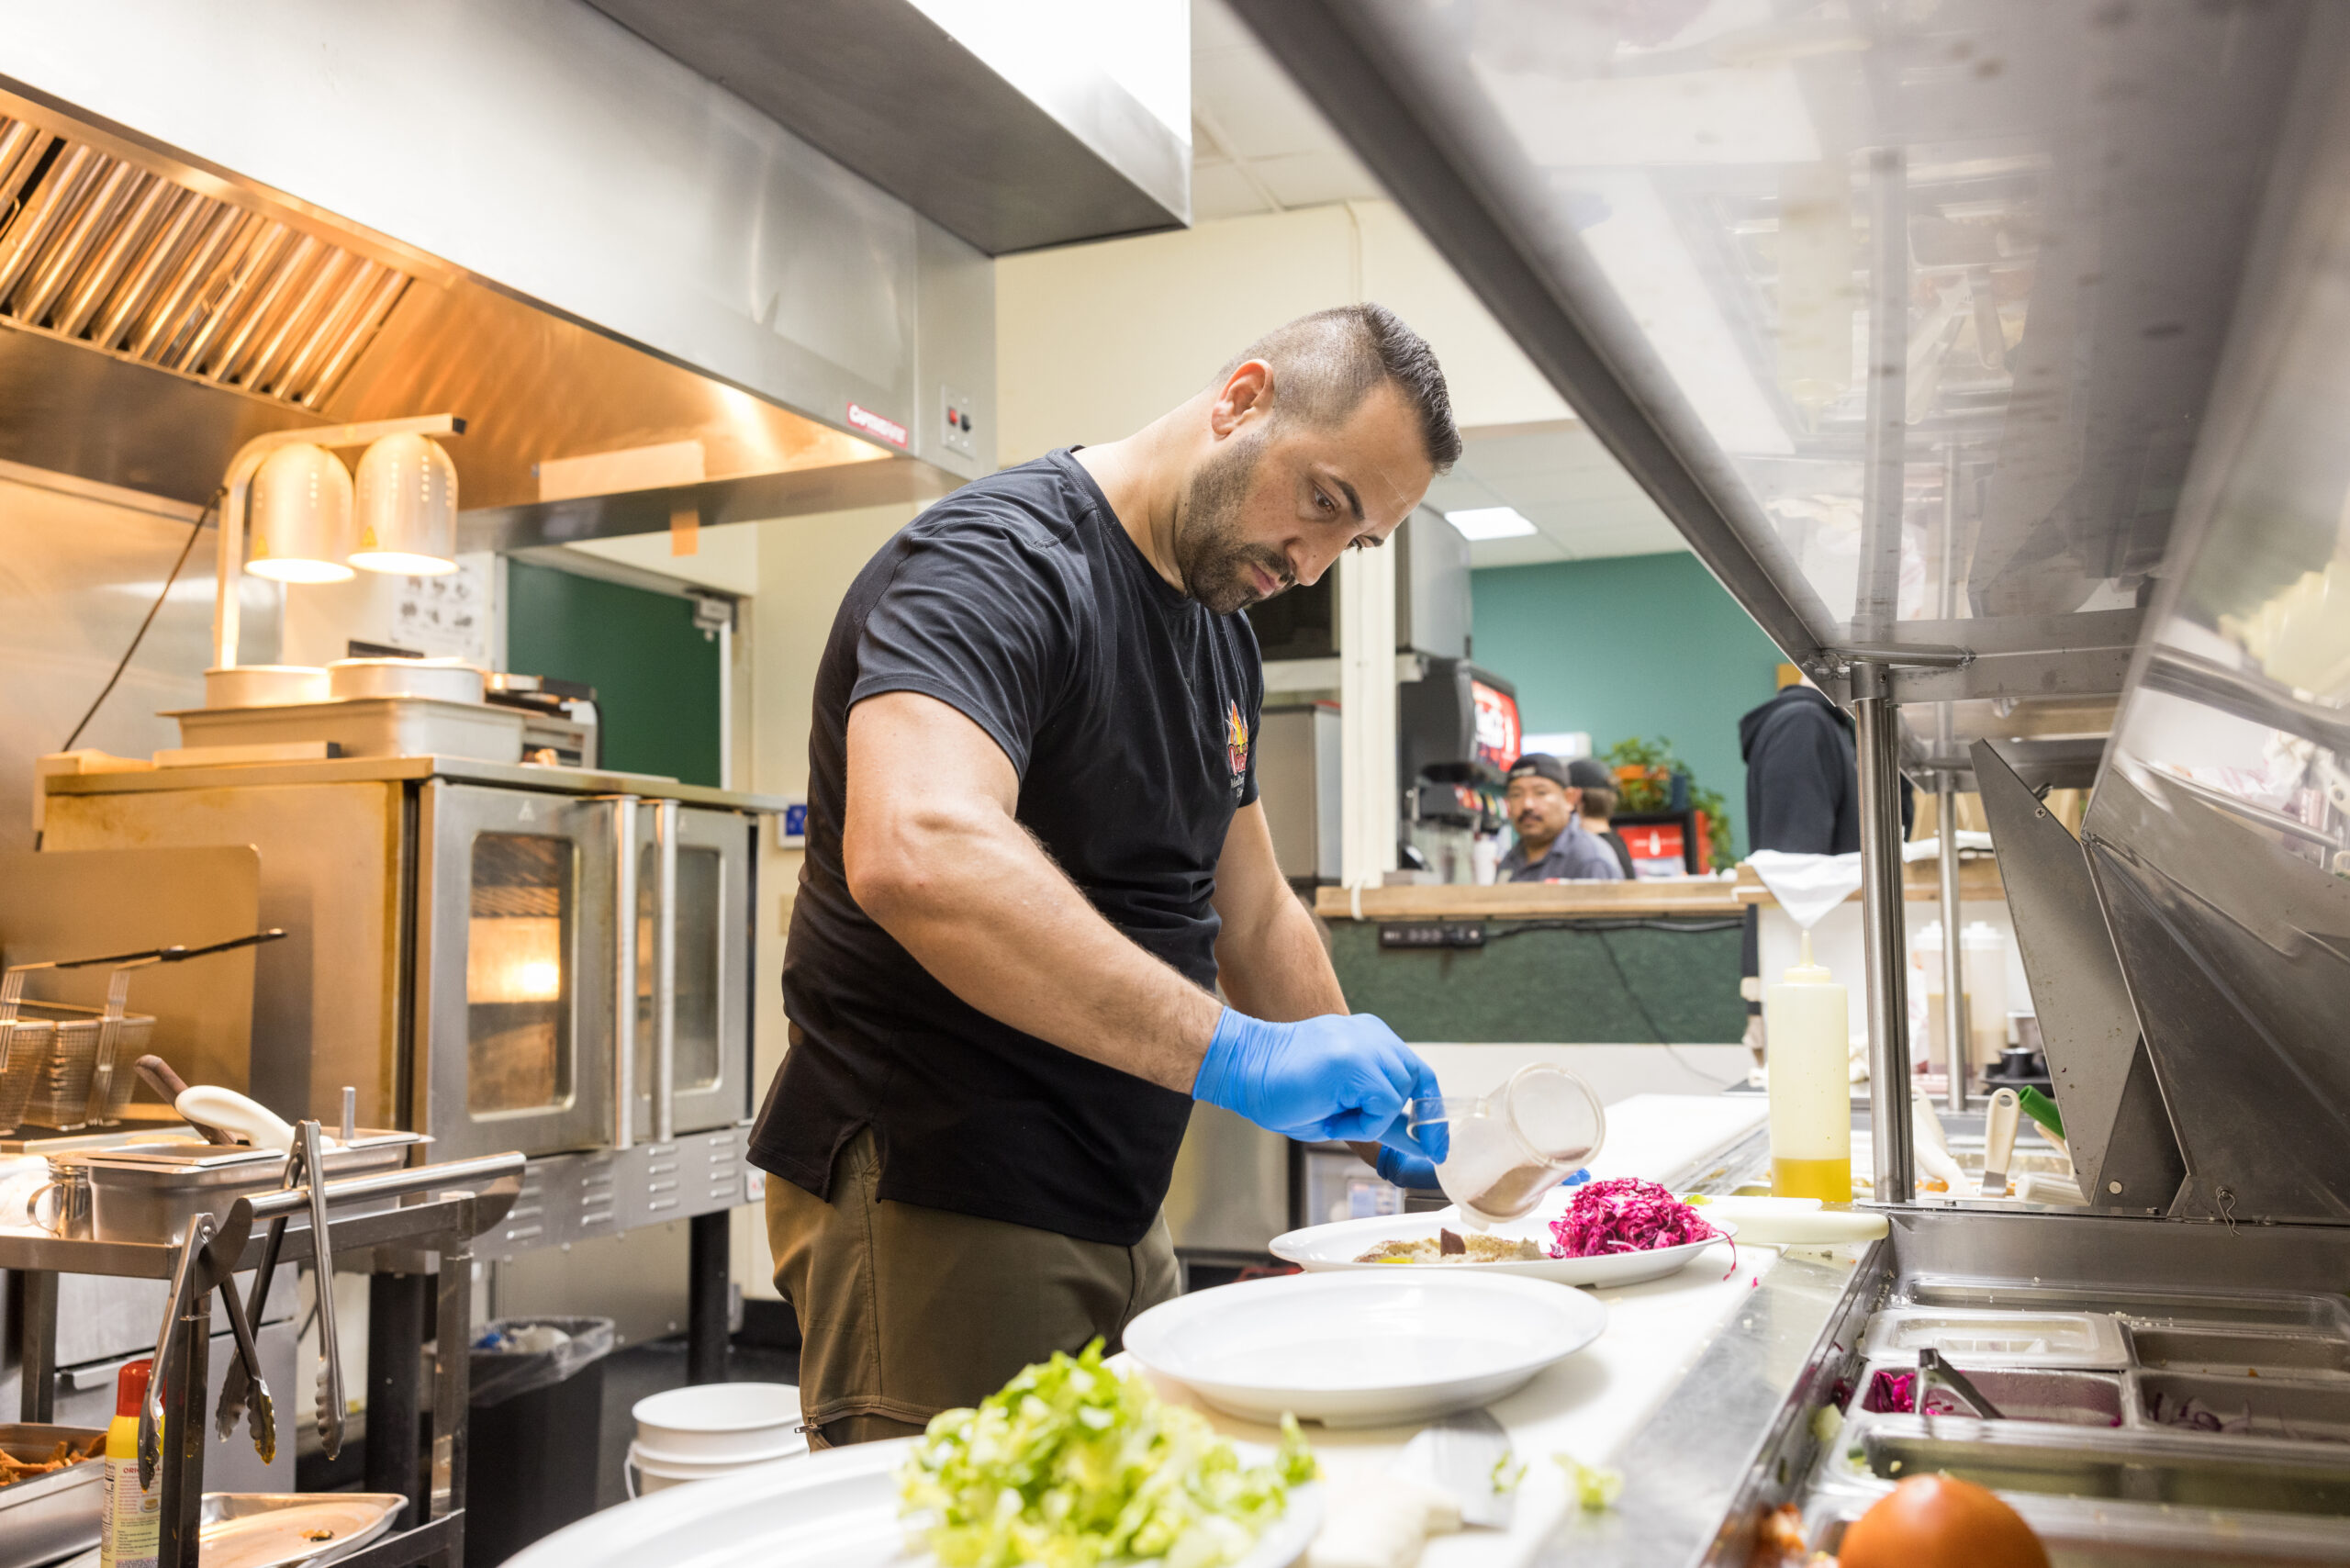 Odeh works on cooking a dish at his High Point restaurant, Odeh's Mediterranean Kitchen.